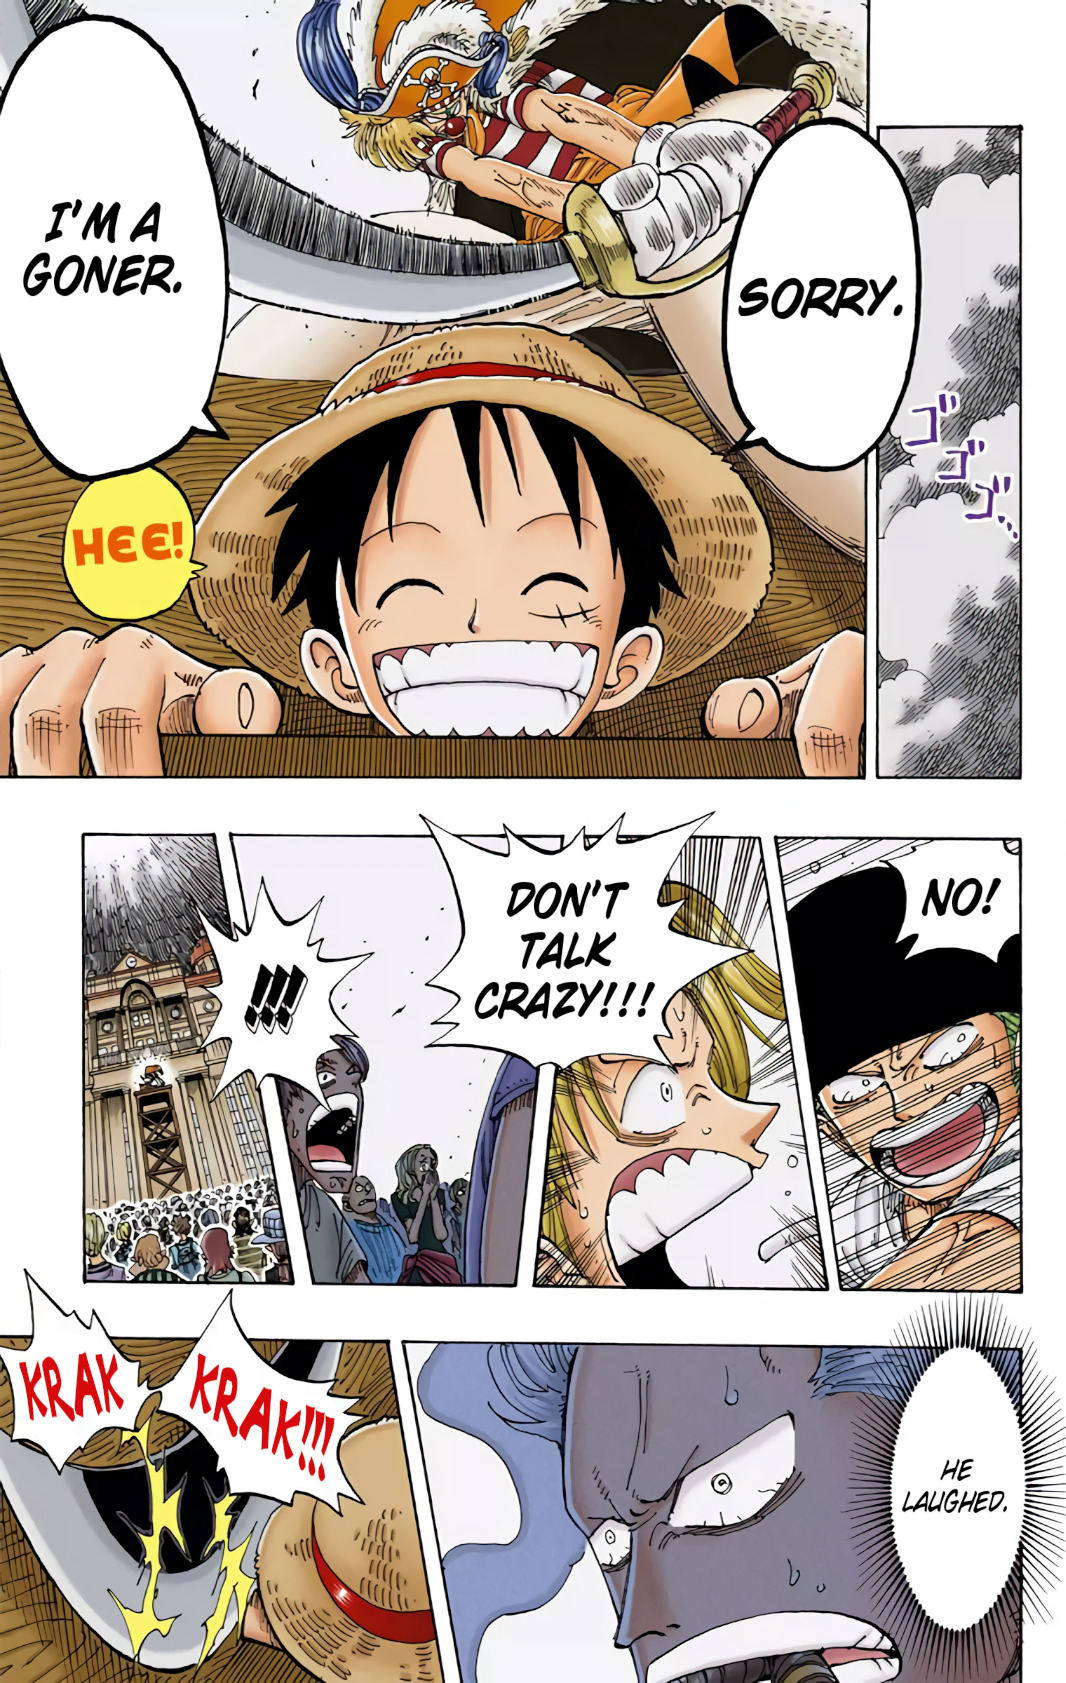 Luffy accepts his upcoming execution in One Piece Chapter 99 "Luffy Died" (1999), Shueisha. Words and art by Eiichiro Oda.